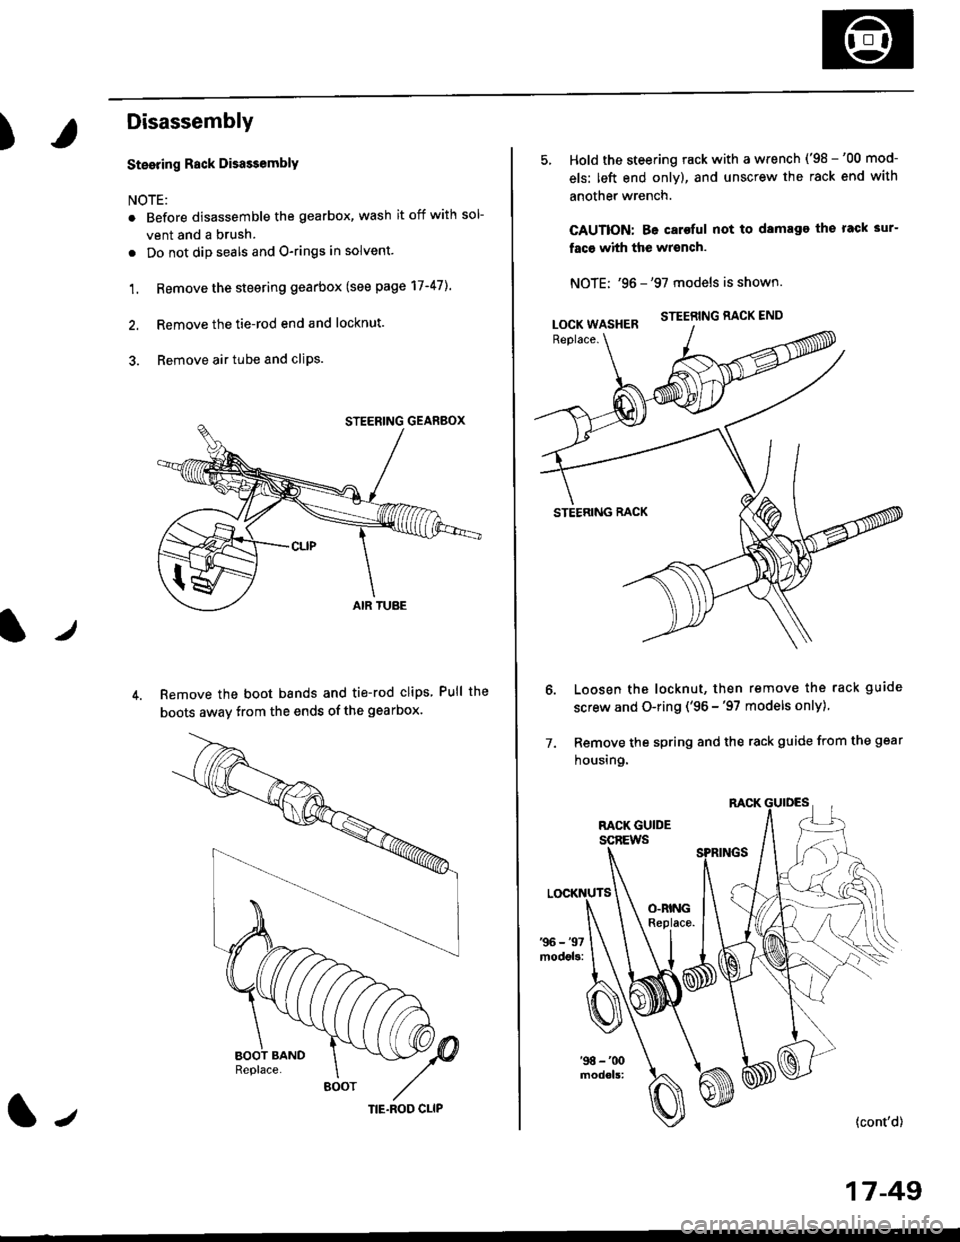 HONDA CIVIC 1996 6.G Owners Manual )
Disassembly
t)
Steering Rack DisassemblY
NOTE:
r Before disassemble the gearbox, wash it off with sol
vent and a brush.
. Do not dip seals and O-rings in solvent.
1. Remove the steering gearbox (see